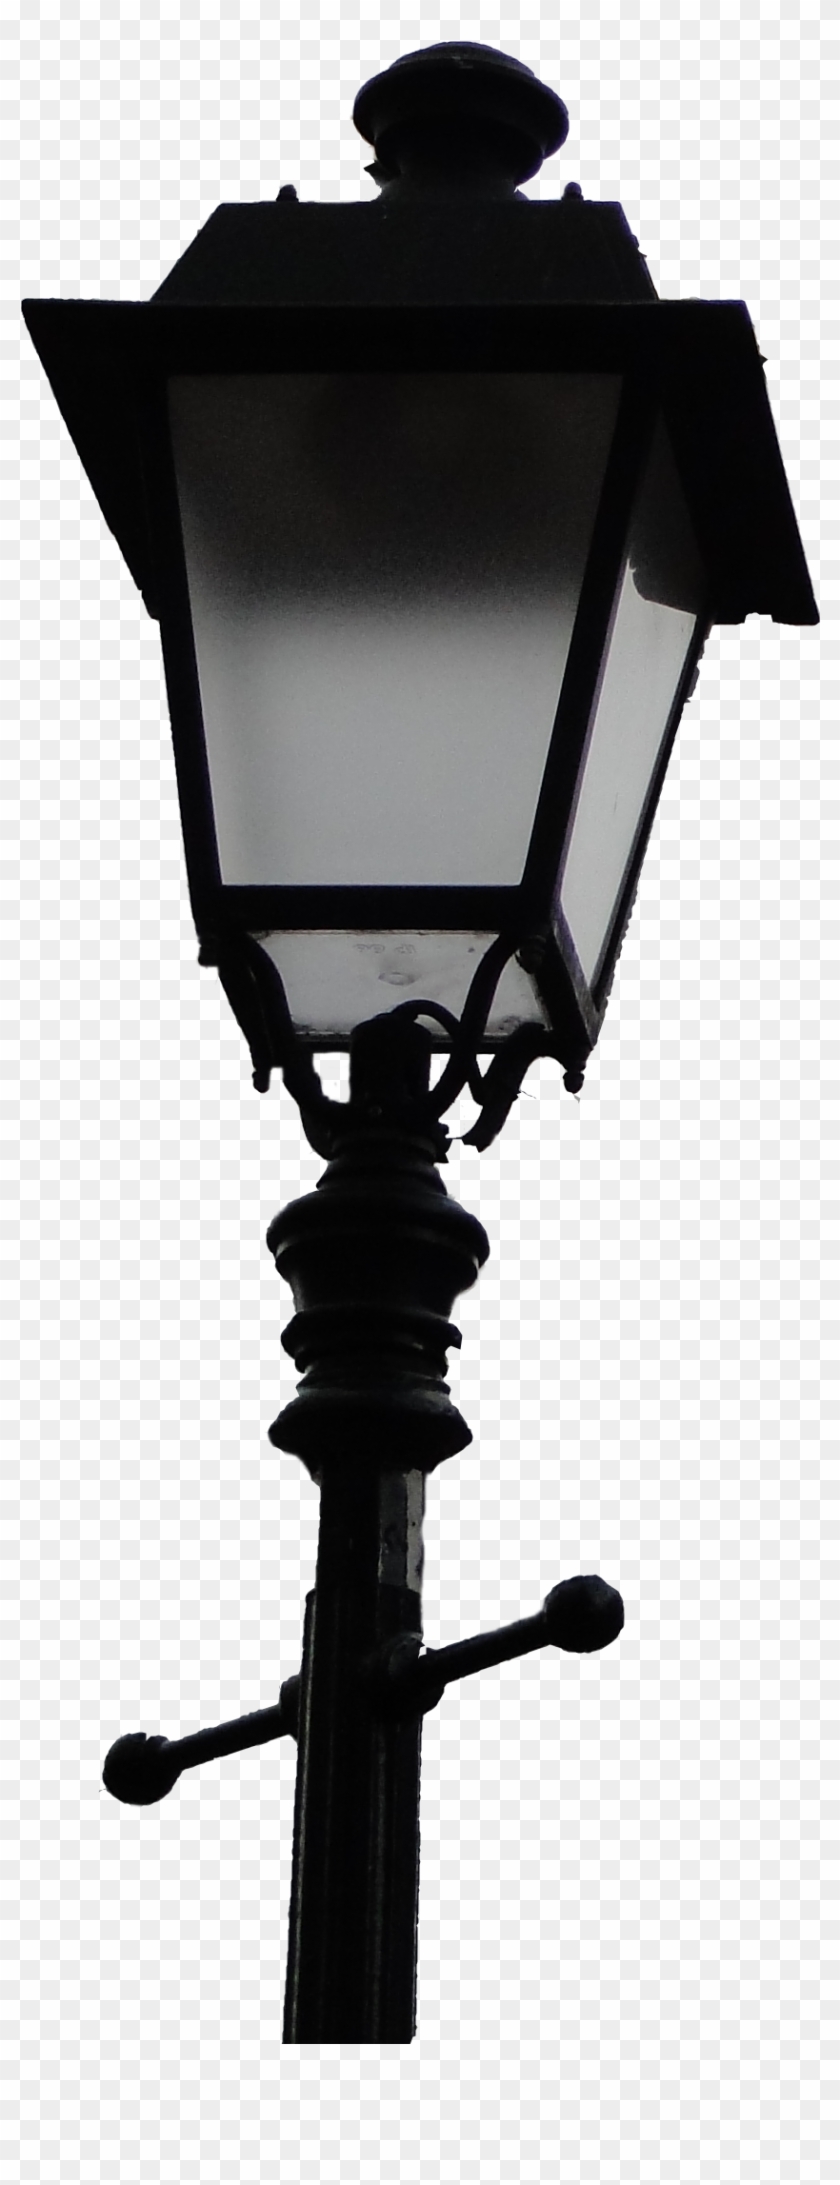 Cool Download File With Street Lamp Clipart Png - Portable Network Graphics #600804